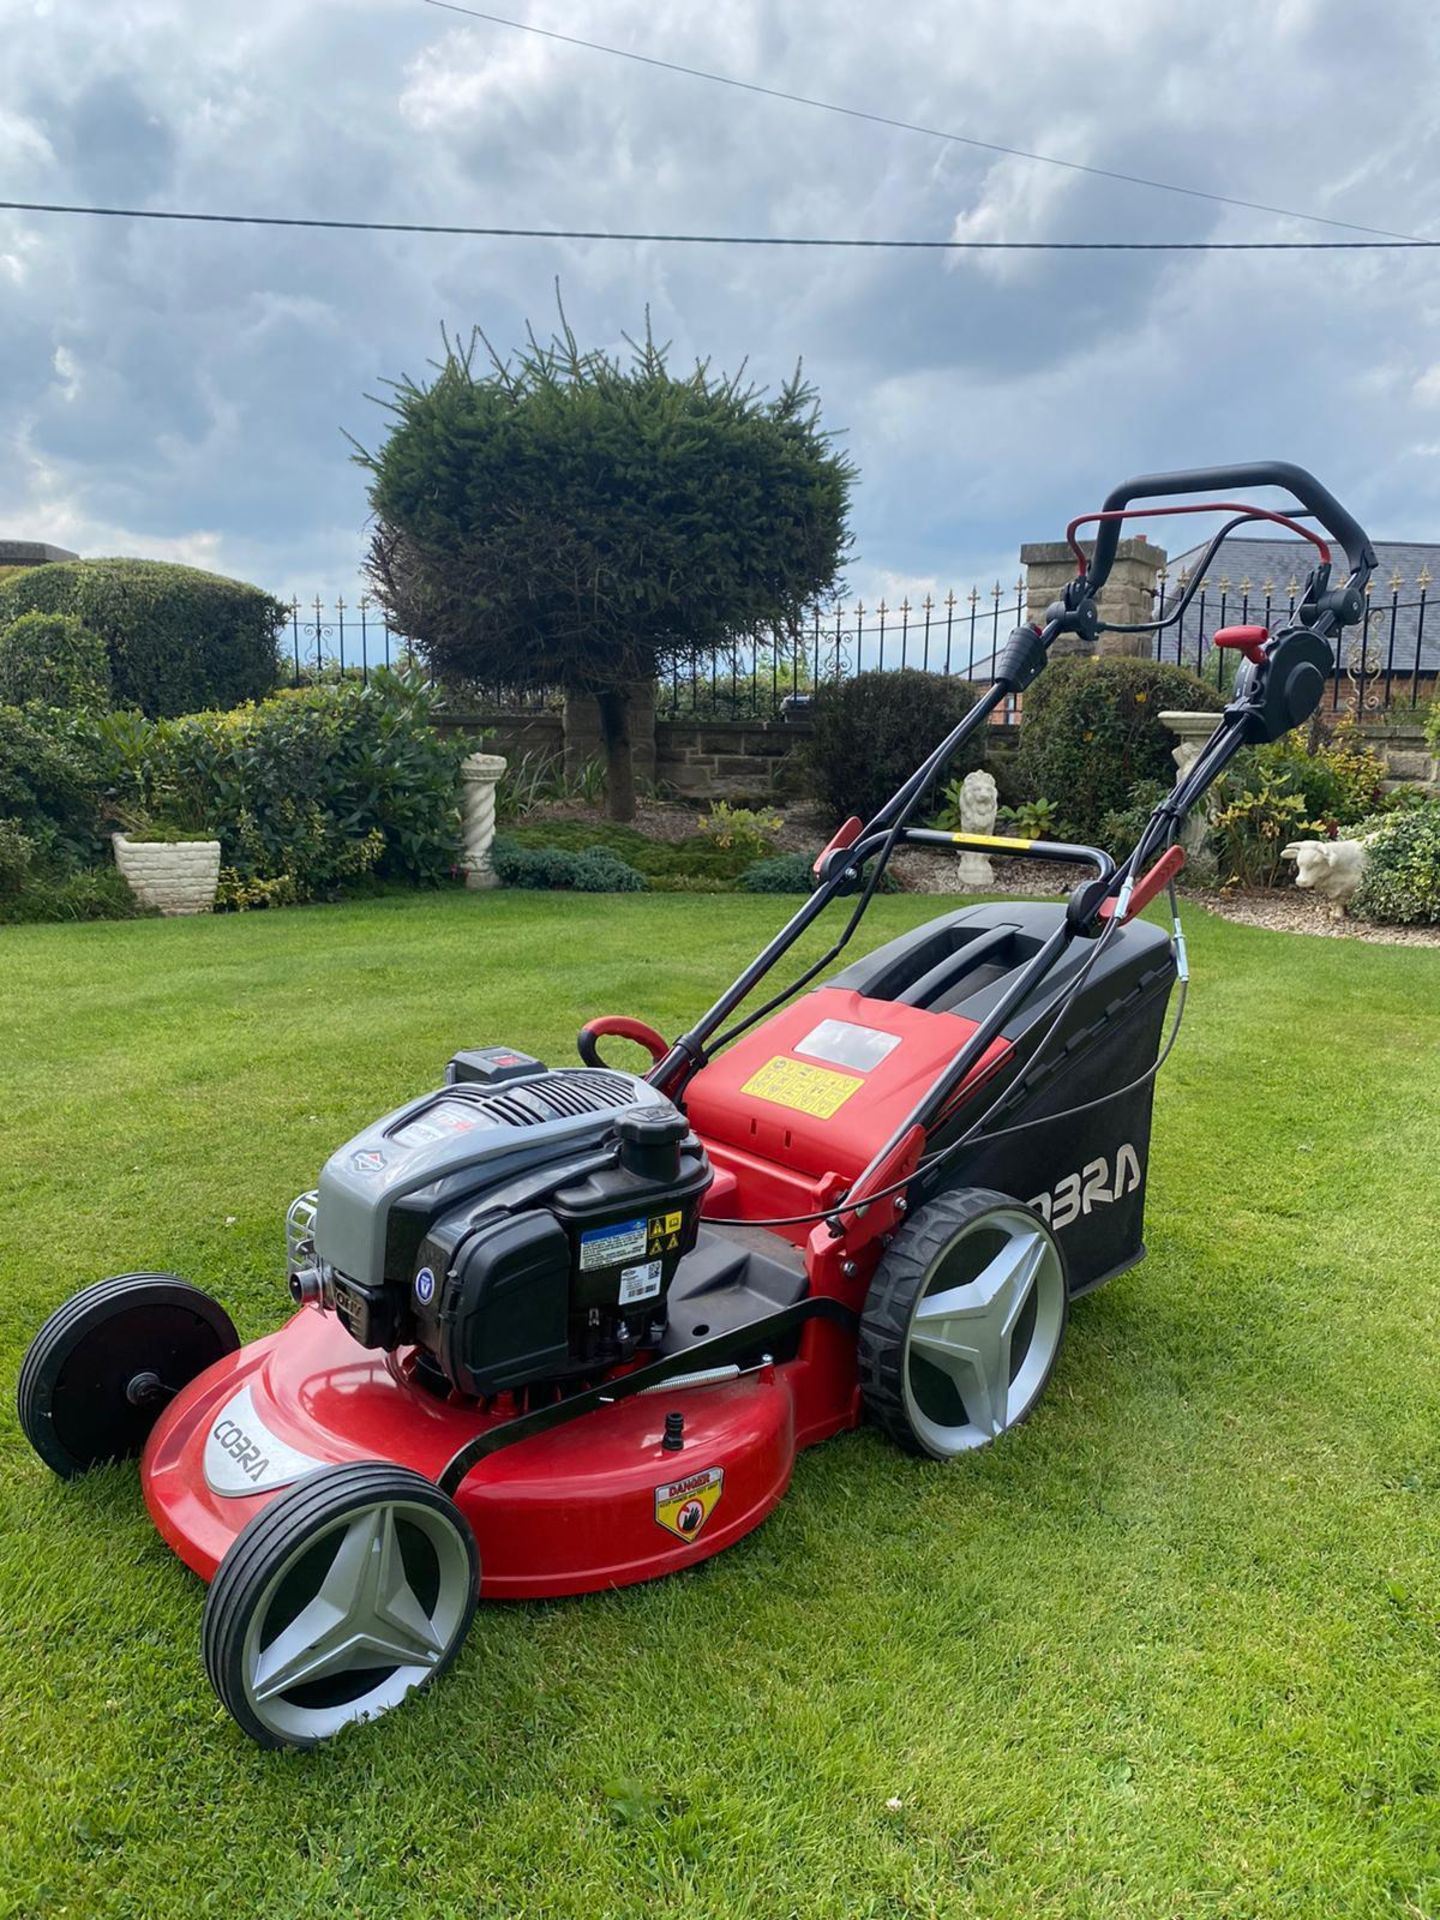 NEW AND UNUSED COBRA MX515SPBI LAWN MOWER, ELECTRIC START, 20" DECK, MANUAL INCLUDED *NO VAT* - Image 2 of 6